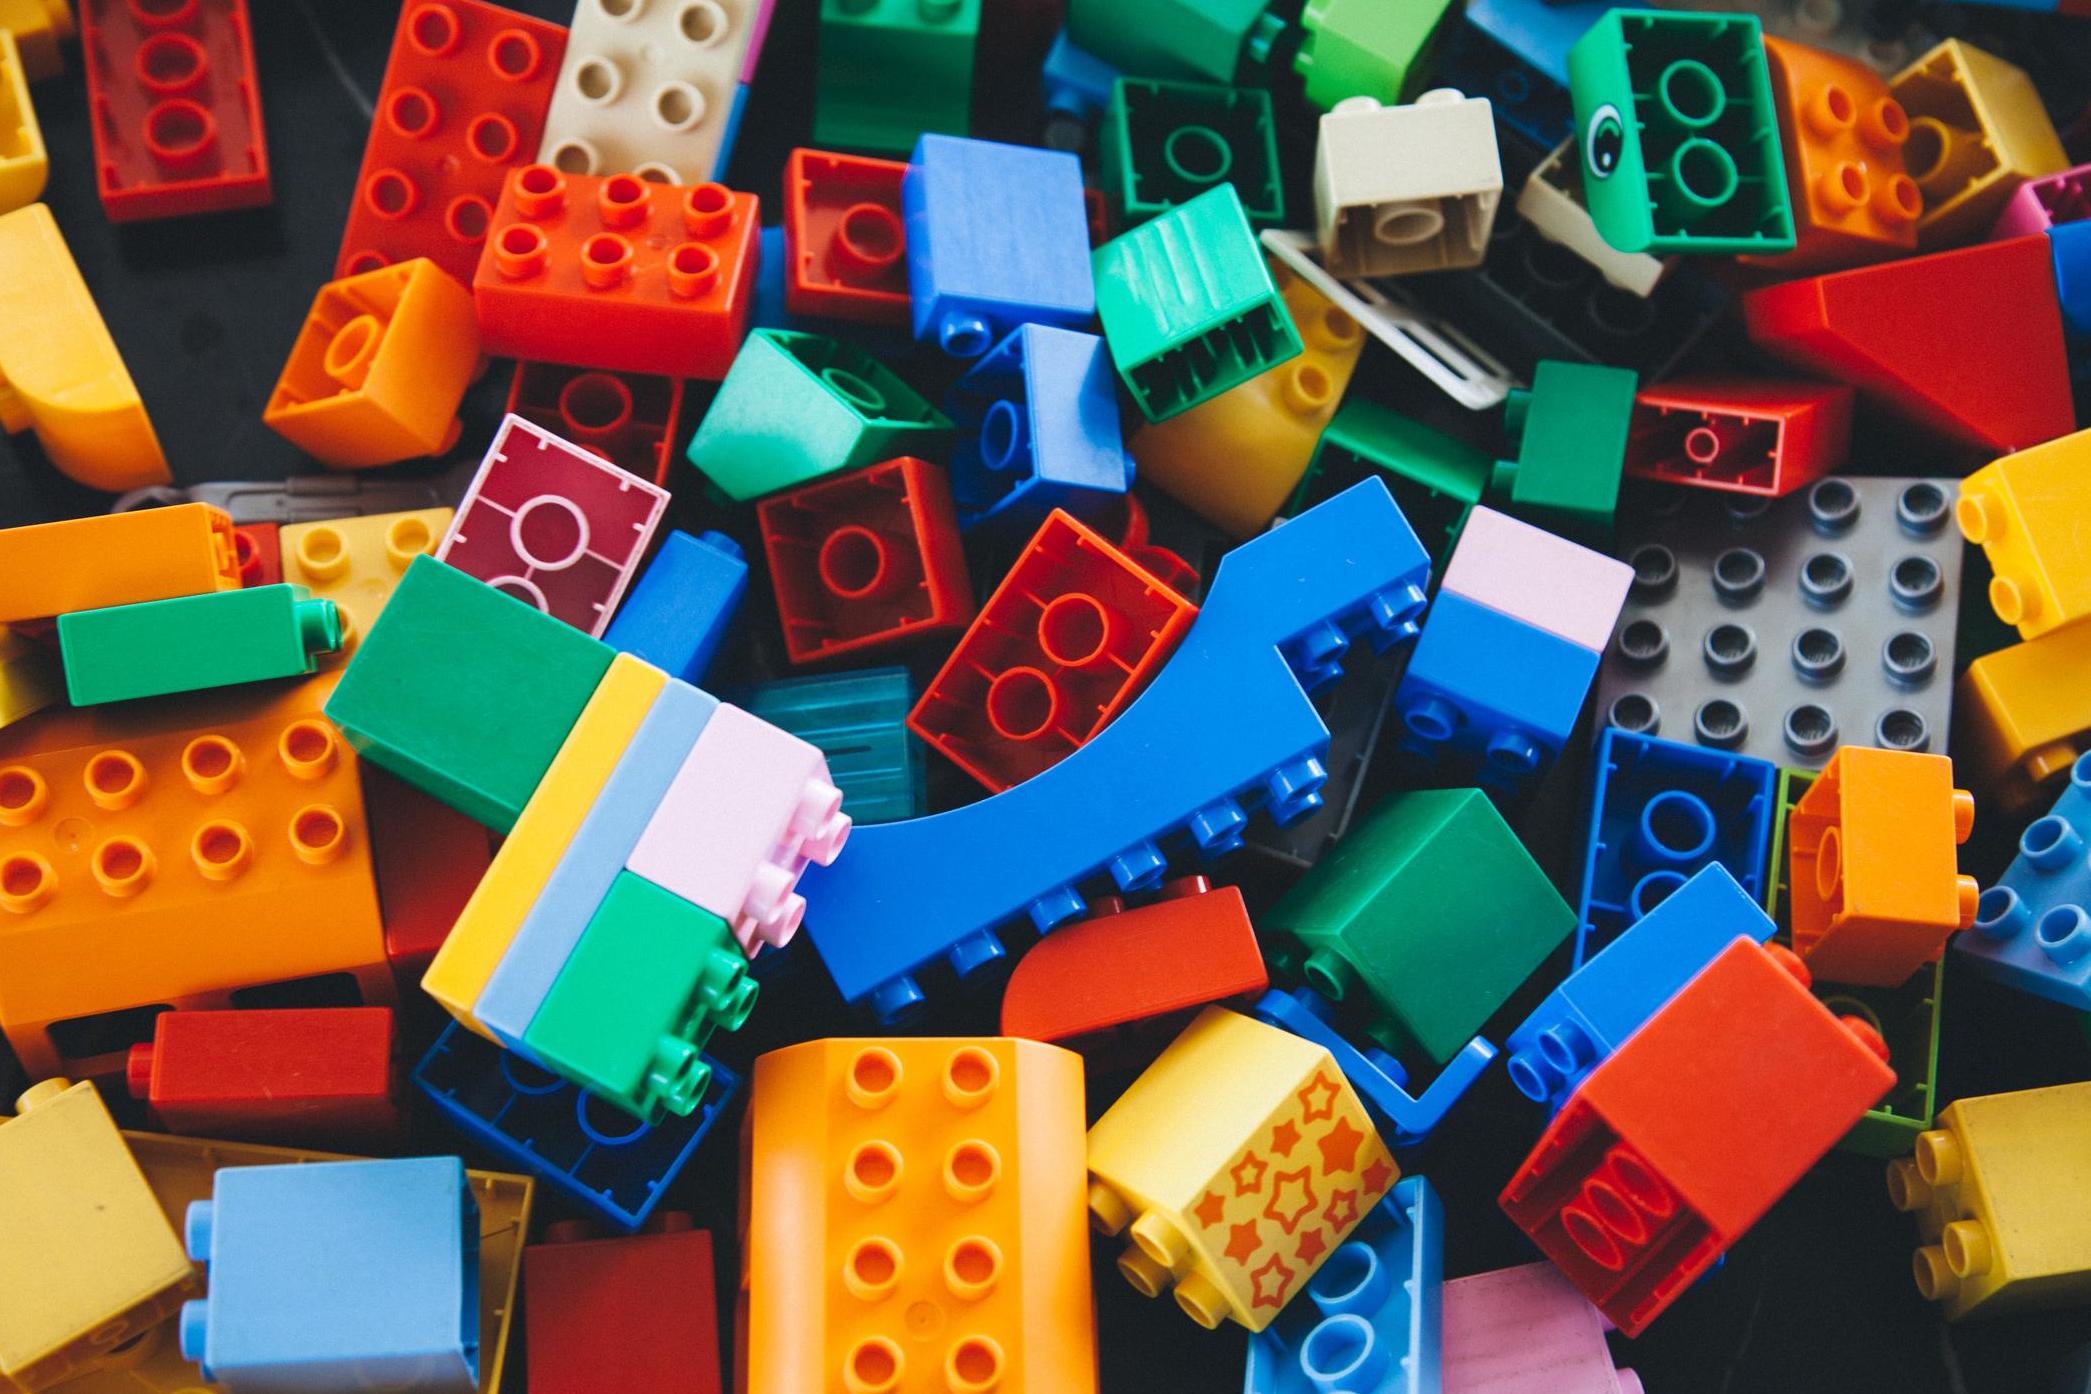 Lego has about a 3 per cent market share in China